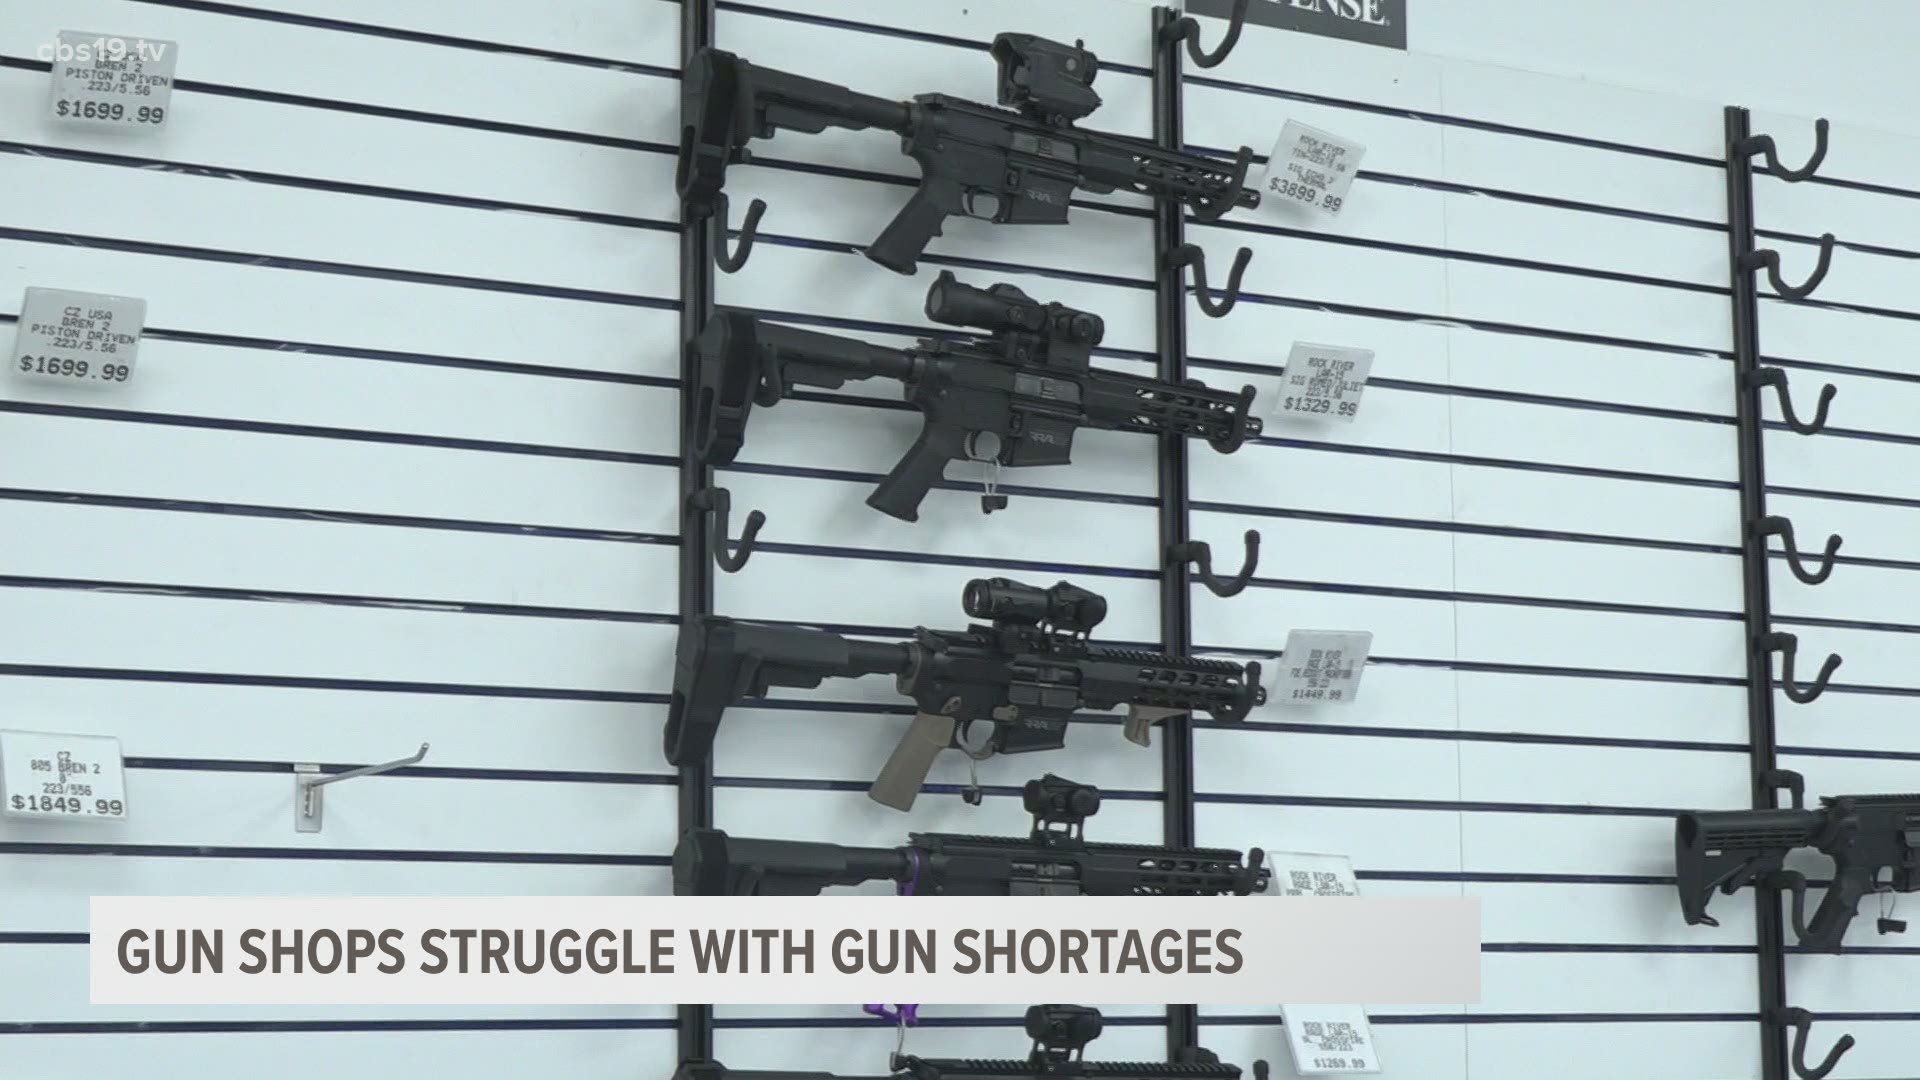 Demand for firearms is high but supply is low.